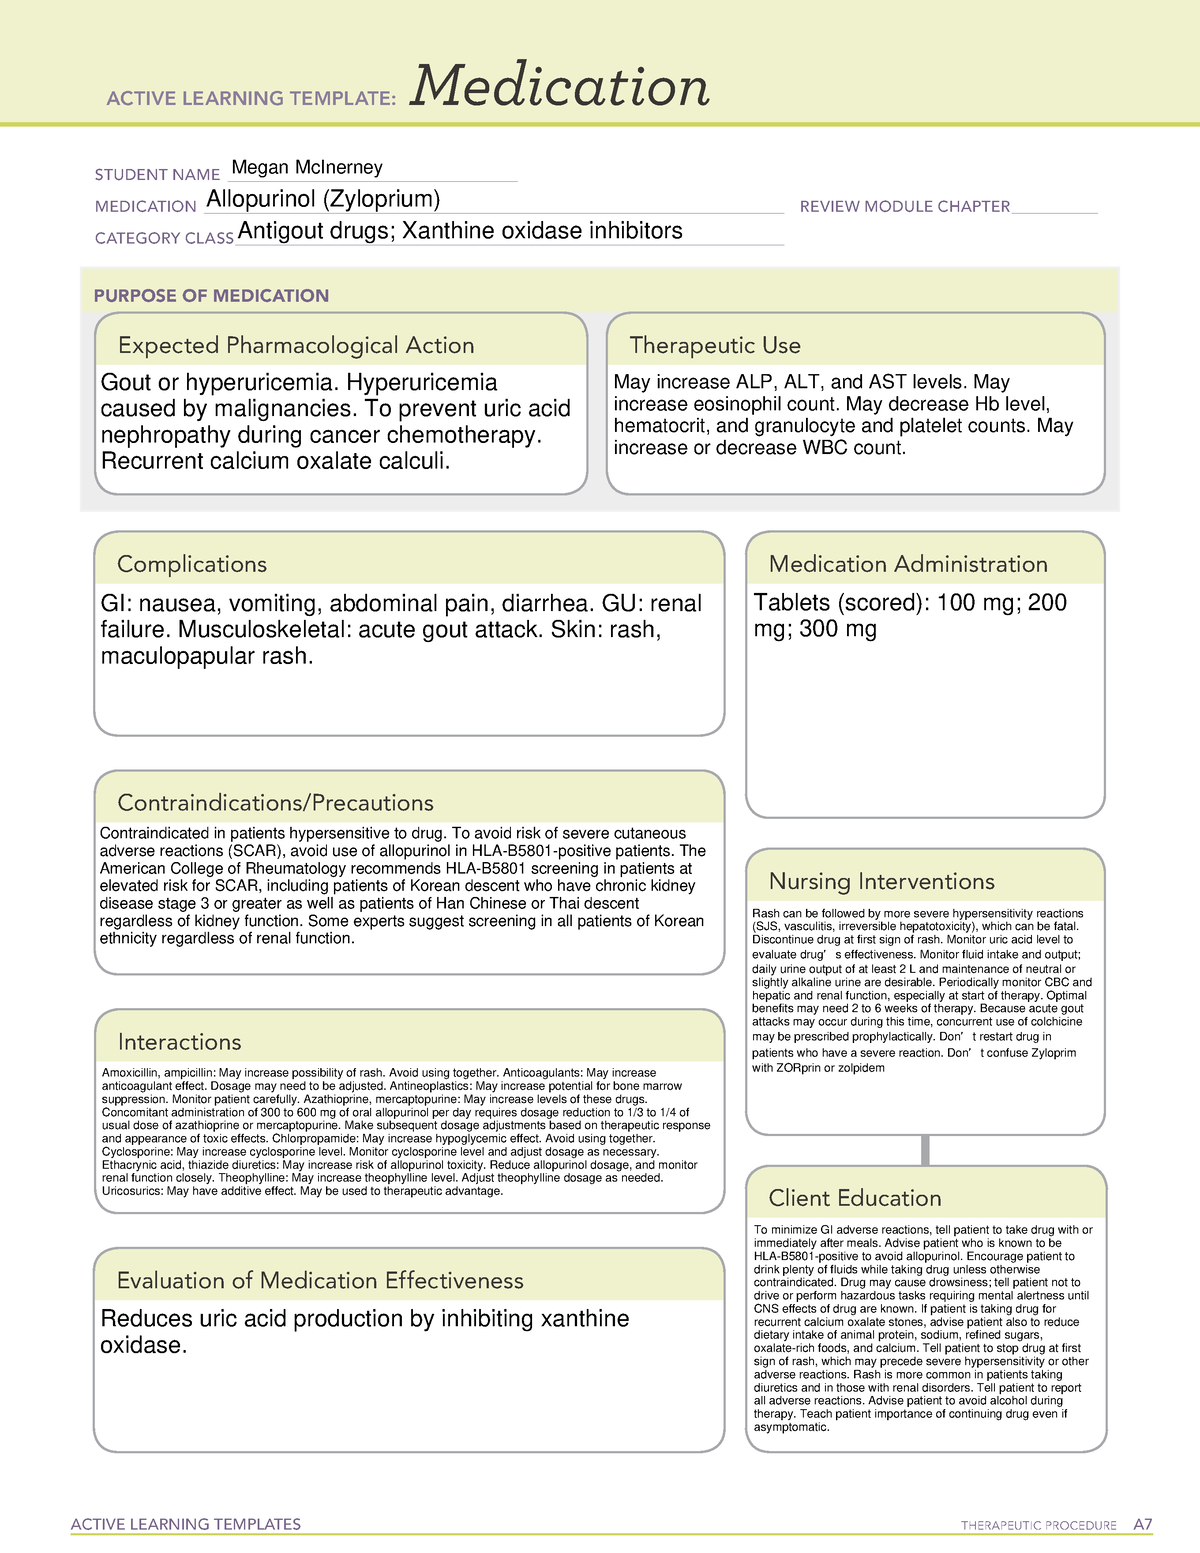 Allopurinol Medication wk 2 ACTIVE LEARNING TEMPLATES THERAPEUTIC